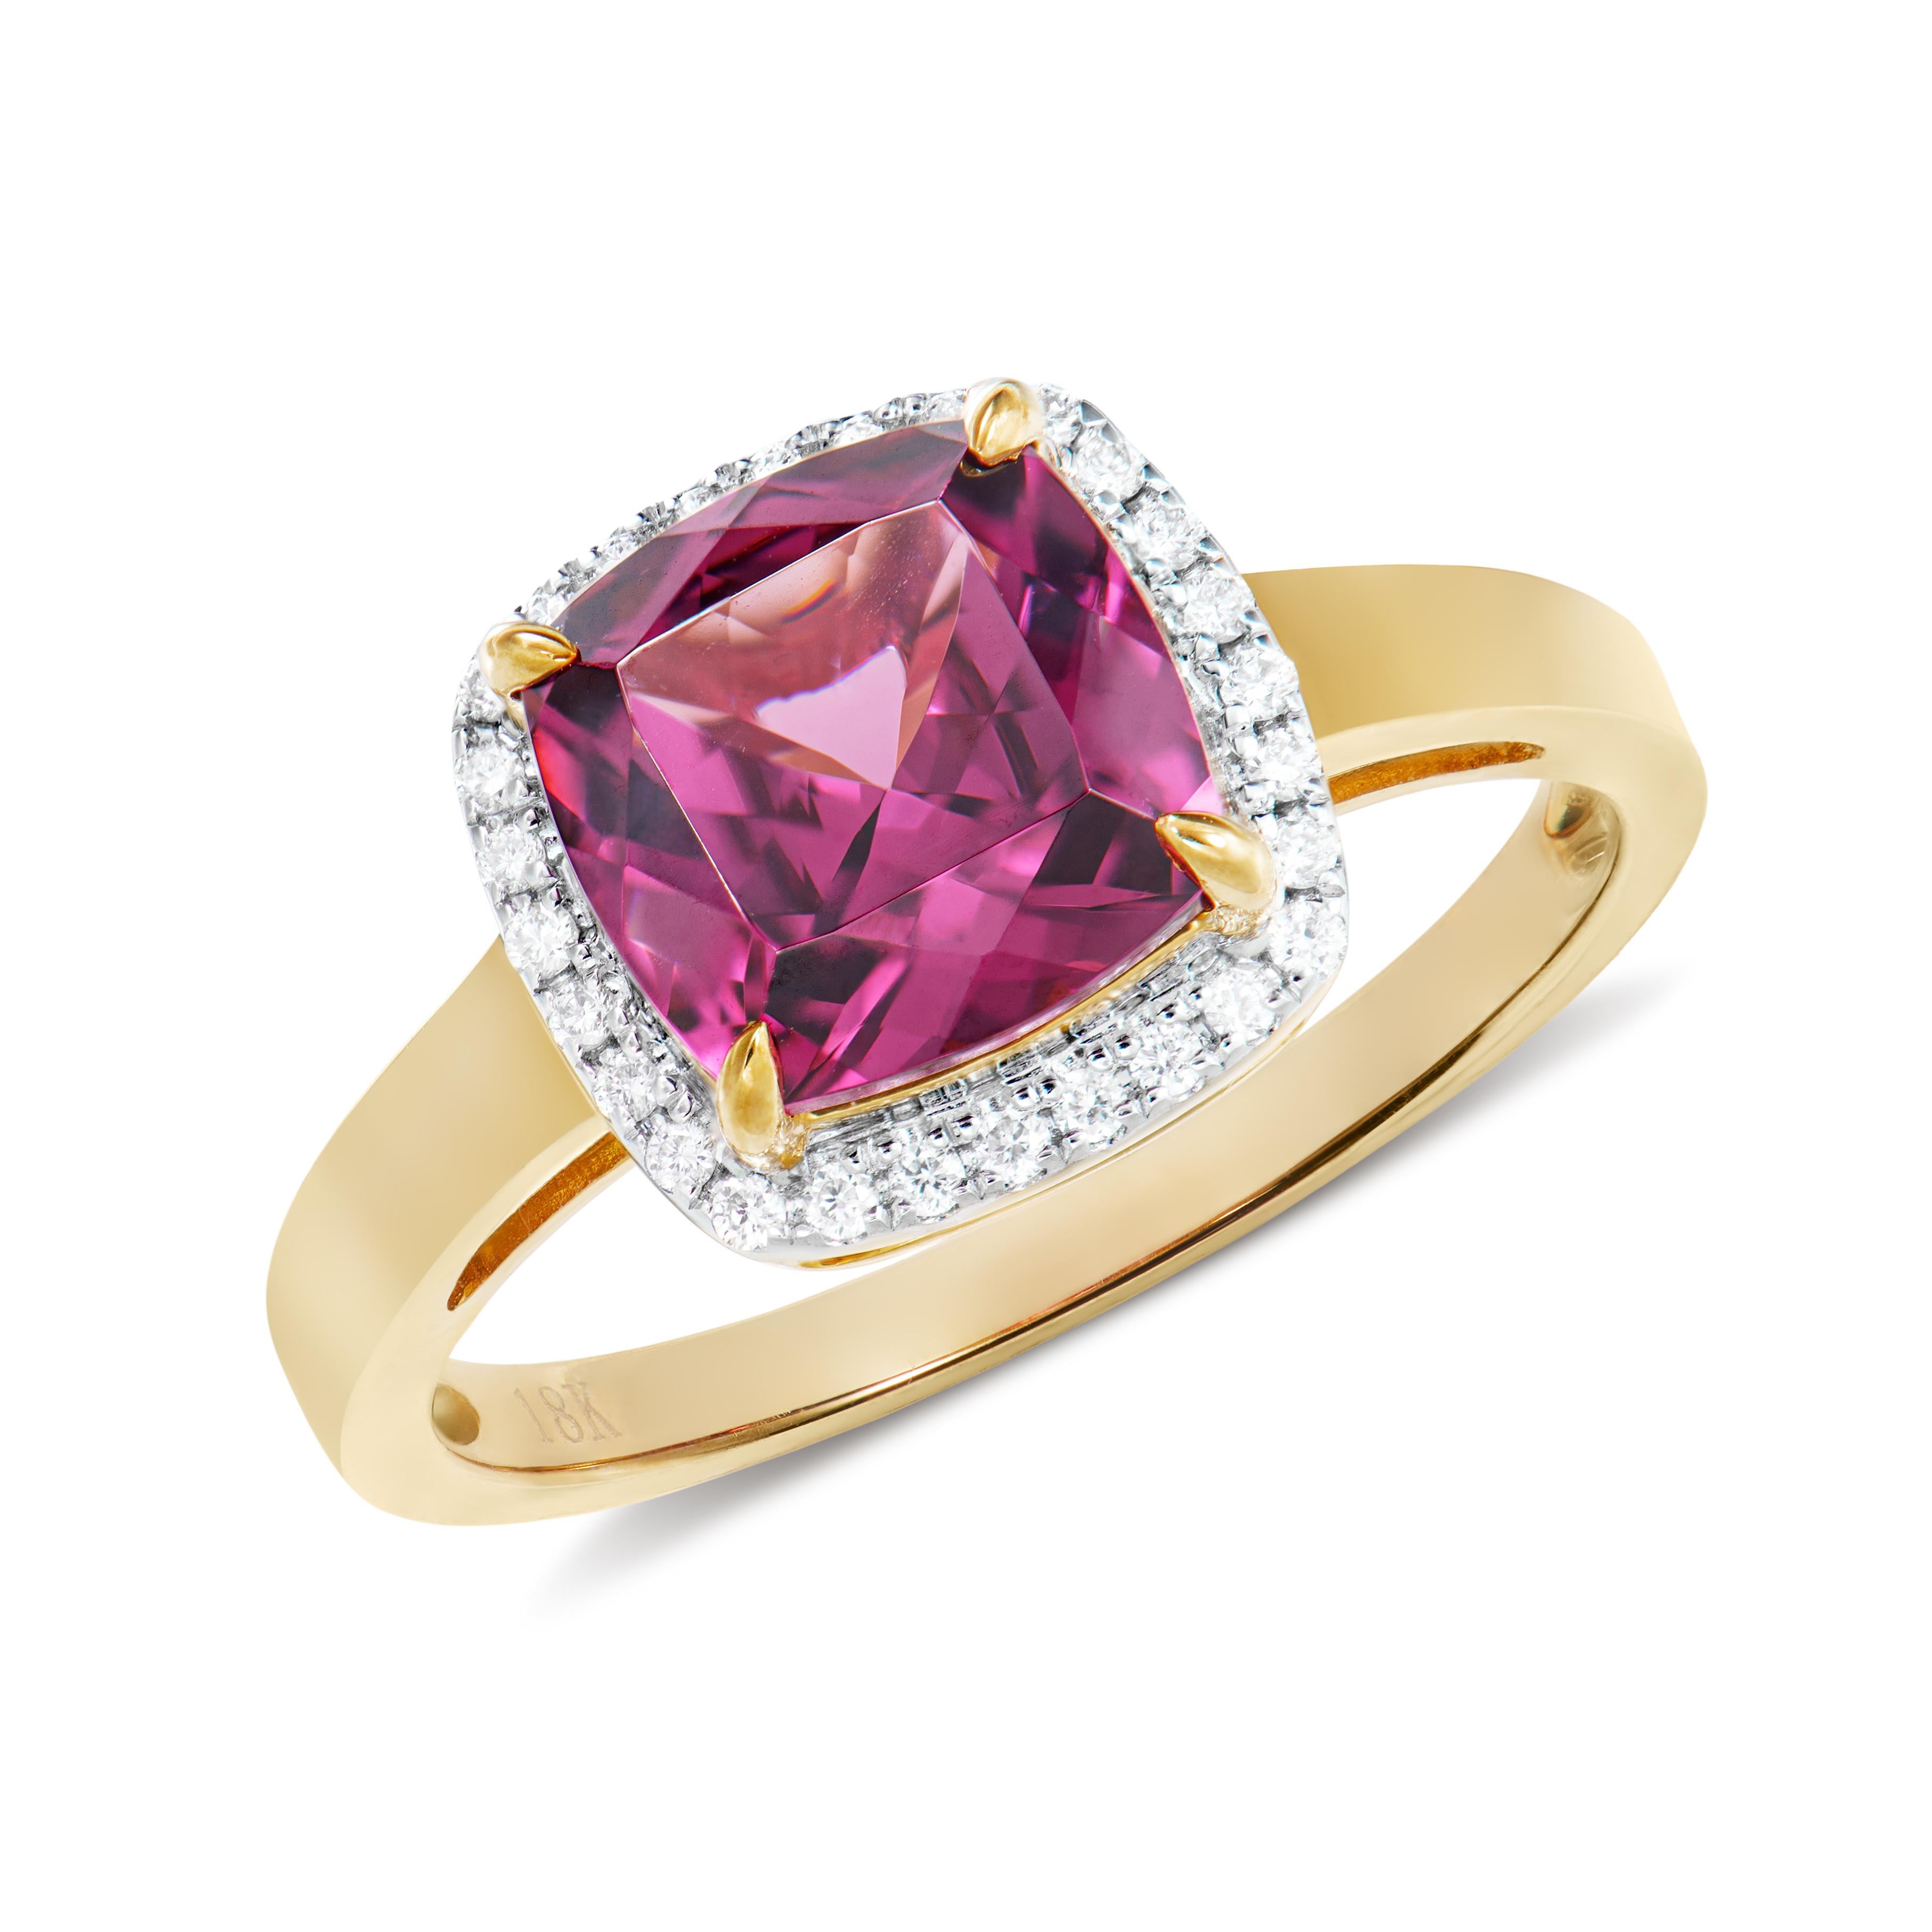 Cushion Cut 2.80 Carat Rhodolite Fancy Ring in 18Karat Yellow Gold with White Diamond.   For Sale